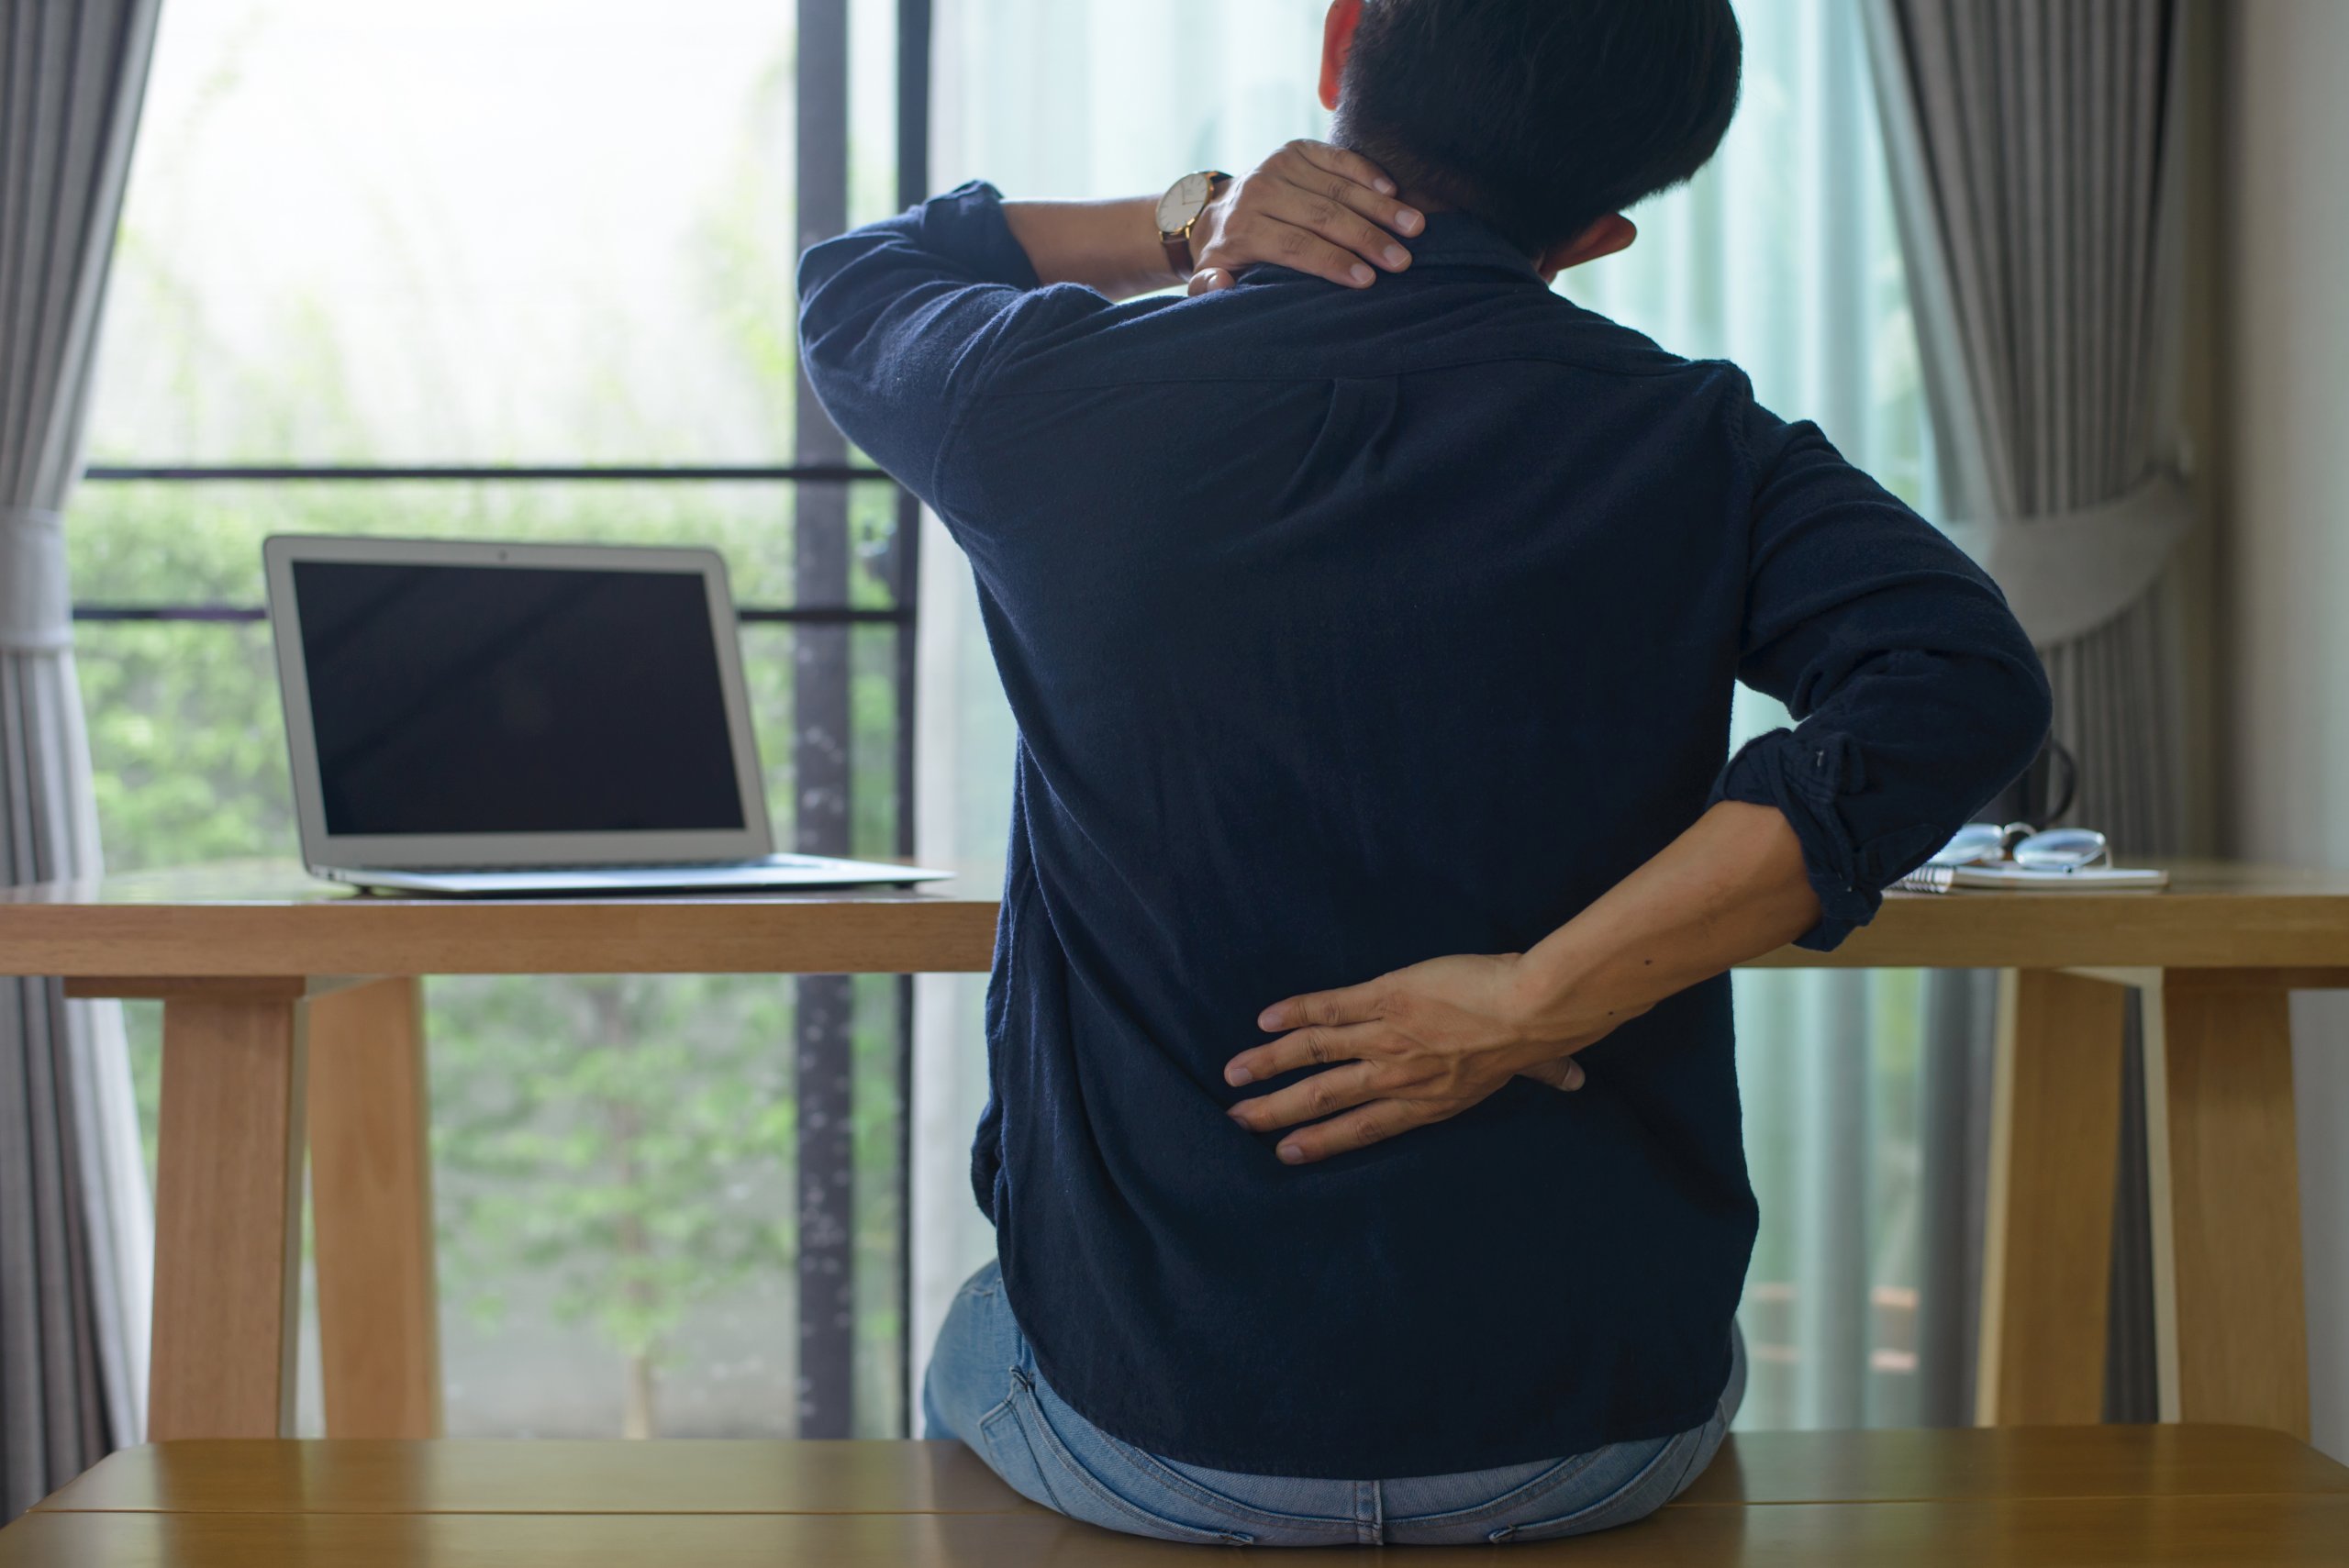 Common Causes Of back pain